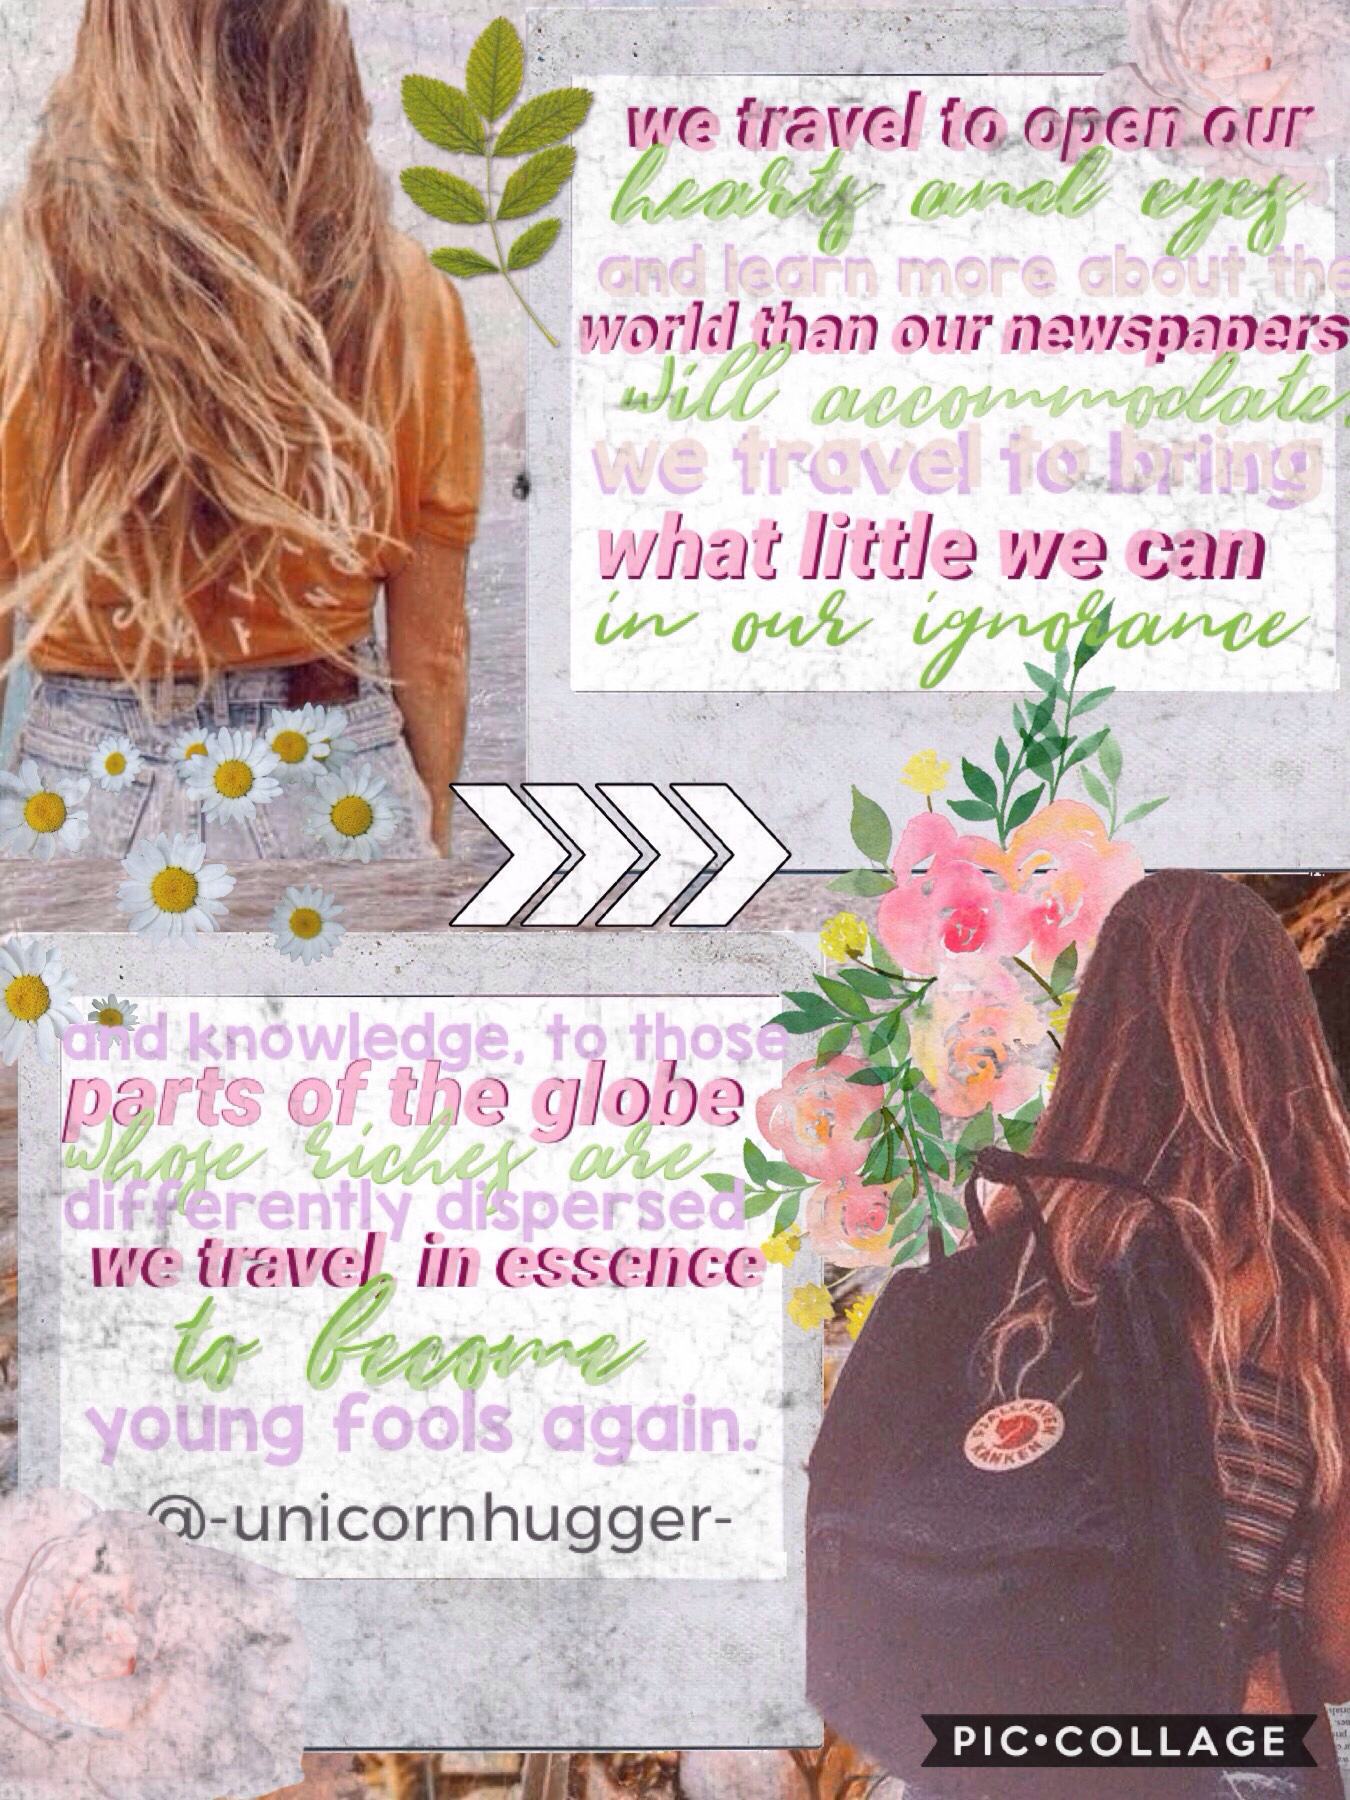 Entry to Abby (EverythingSwift)'s wanderlust contest! This quote is pretty deep 😅